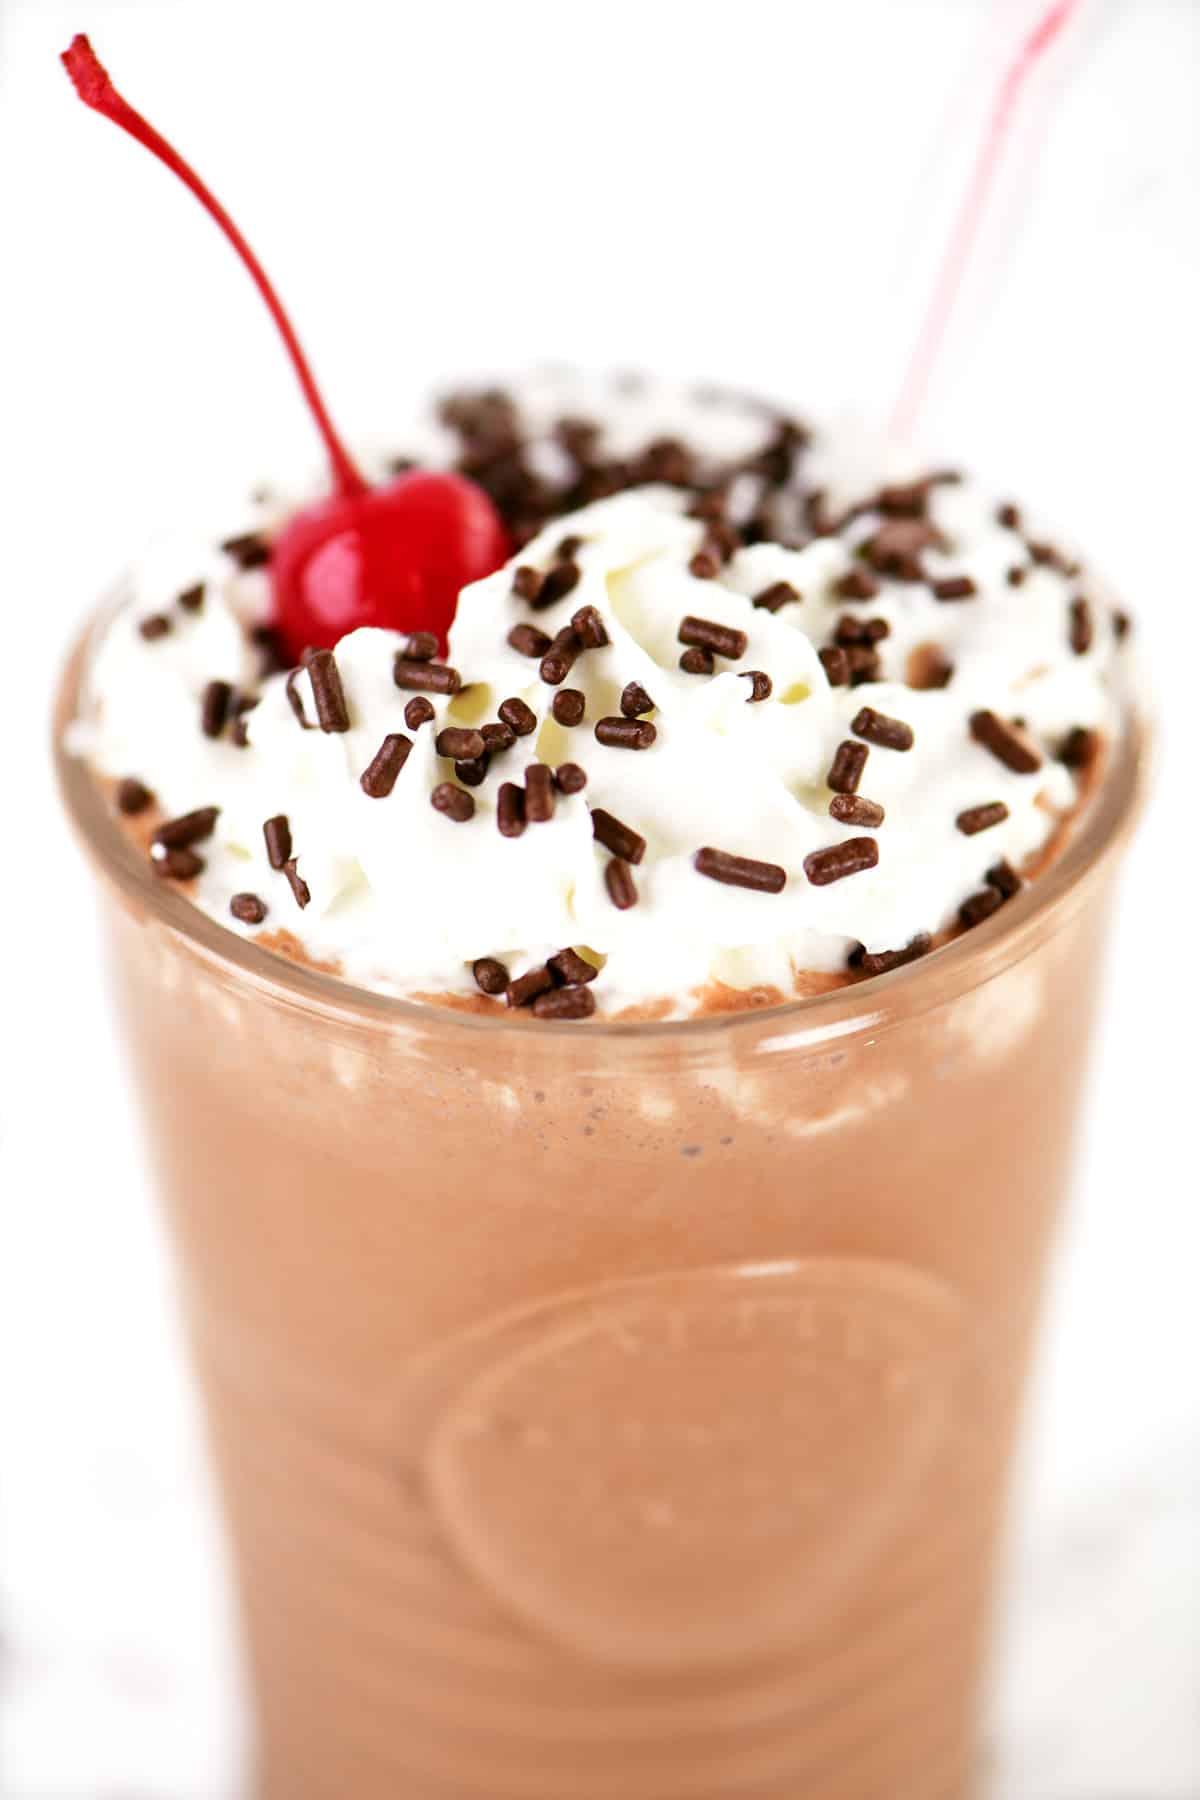 A chocolate milkshake garnished with whipped cream, sprinkles and a cherry.